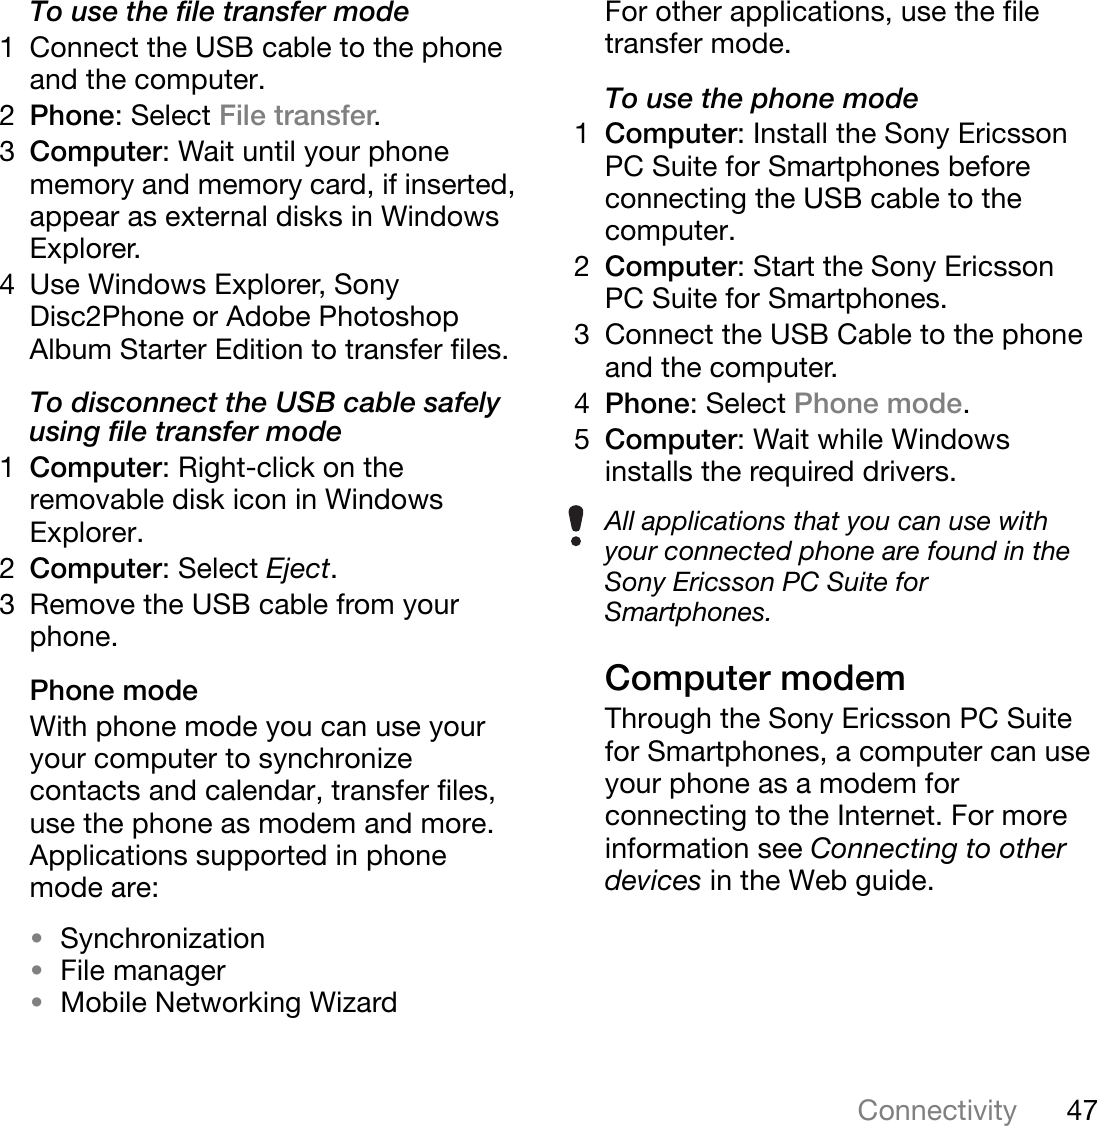 47ConnectivityThis is the Internet version of the user&apos;s guide. © Print only for private use.To use the file transfer mode1 Connect the USB cable to the phone and the computer.2Phone: Select File transfer.3Computer: Wait until your phone memory and memory card, if inserted, appear as external disks in Windows Explorer.4 Use Windows Explorer, Sony Disc2Phone or Adobe Photoshop Album Starter Edition to transfer files.To disconnect the USB cable safely using file transfer mode1Computer: Right-click on the removable disk icon in Windows Explorer.2Computer: Select Eject.3 Remove the USB cable from your phone.Phone modeWith phone mode you can use your your computer to synchronize contacts and calendar, transfer files, use the phone as modem and more. Applications supported in phone mode are:•Synchronization•File manager•Mobile Networking WizardFor other applications, use the file transfer mode.To use the phone mode1Computer: Install the Sony Ericsson PC Suite for Smartphones before connecting the USB cable to the computer. 2Computer: Start the Sony Ericsson PC Suite for Smartphones.3 Connect the USB Cable to the phone and the computer.4Phone: Select Phone mode.5Computer: Wait while Windows installs the required drivers.Computer modemThrough the Sony Ericsson PC Suite for Smartphones, a computer can use your phone as a modem for connecting to the Internet. For more information see Connecting to other devices in the Web guide.All applications that you can use with your connected phone are found in the Sony Ericsson PC Suite for Smartphones.